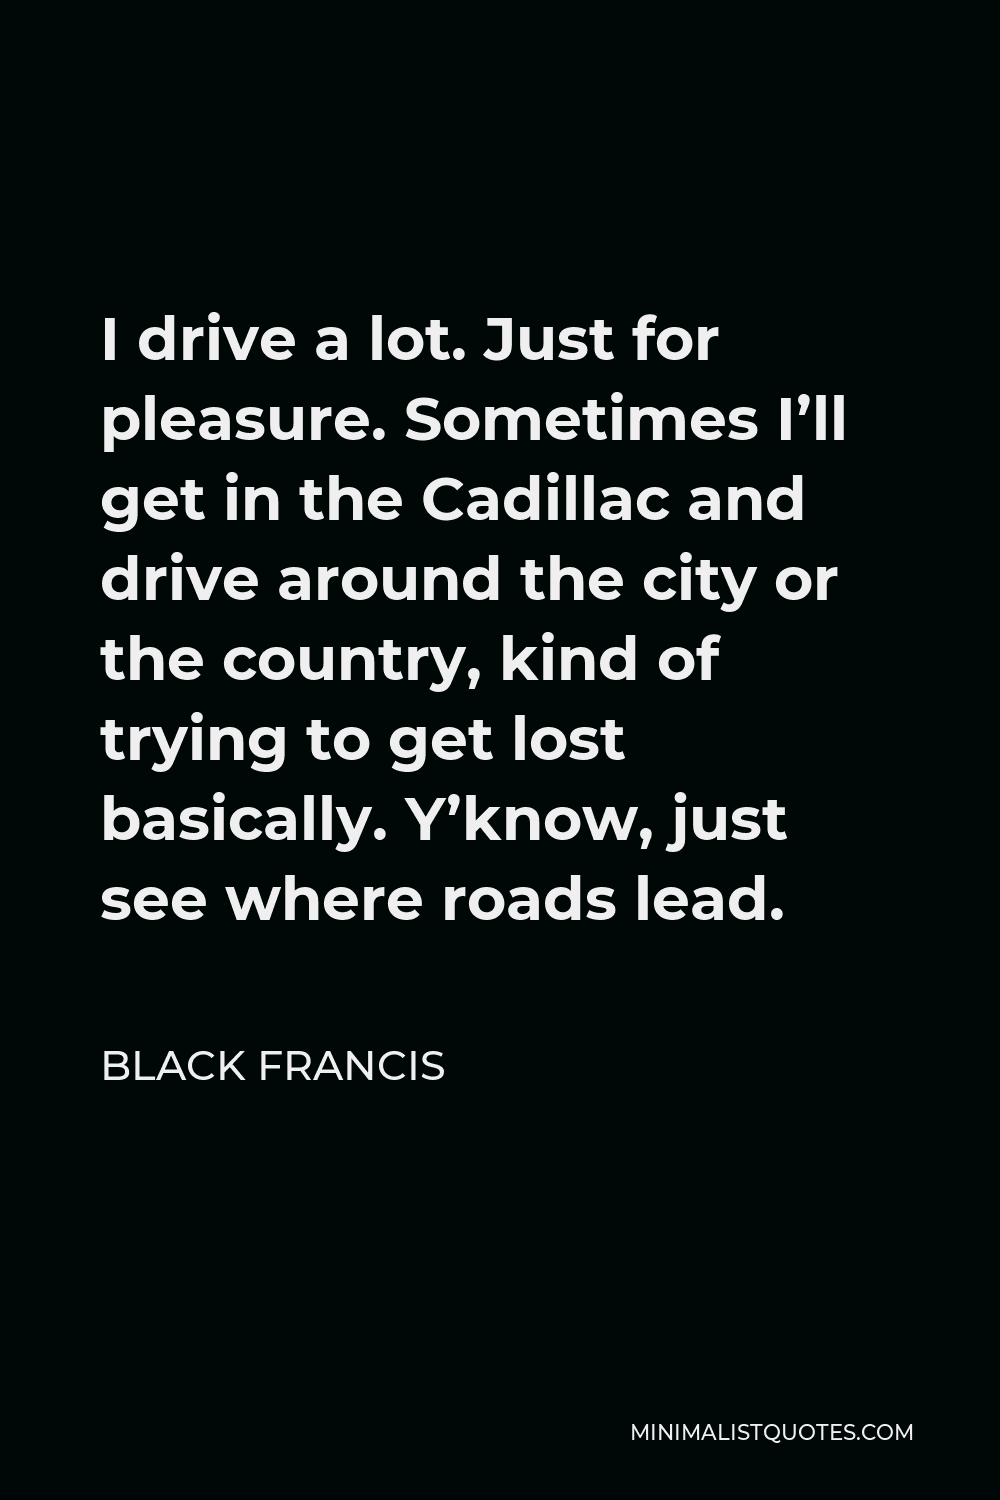 Black Francis Quote - I drive a lot. Just for pleasure. Sometimes I’ll get in the Cadillac and drive around the city or the country, kind of trying to get lost basically. Y’know, just see where roads lead.